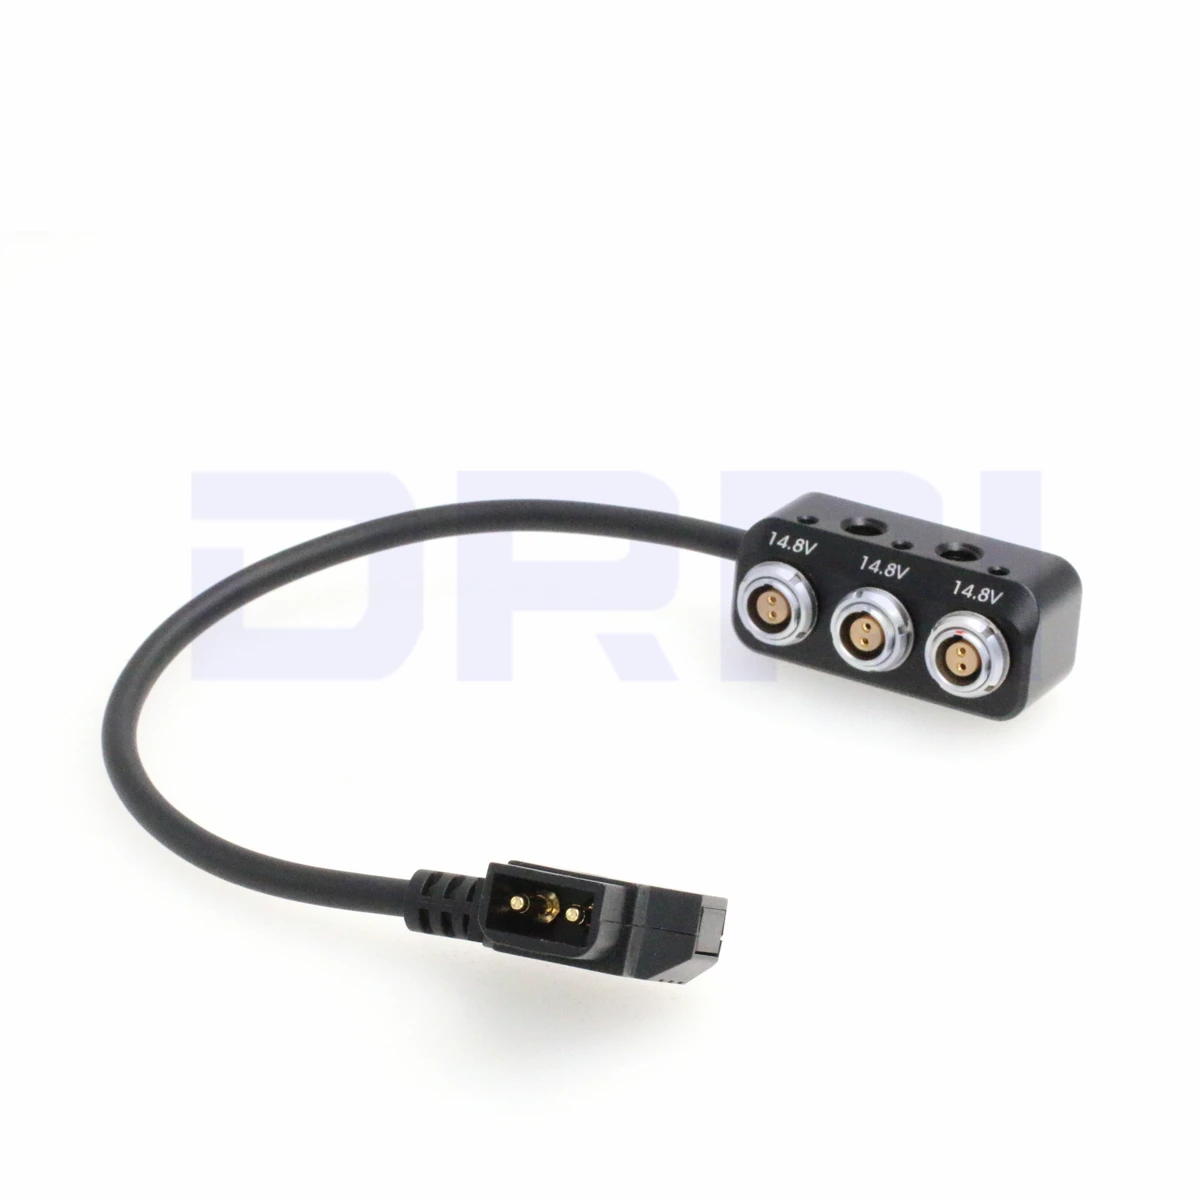 

Dtap To 3X 0B 2pin Splitter Box 12V For Camera Devices Power Supply Distributor